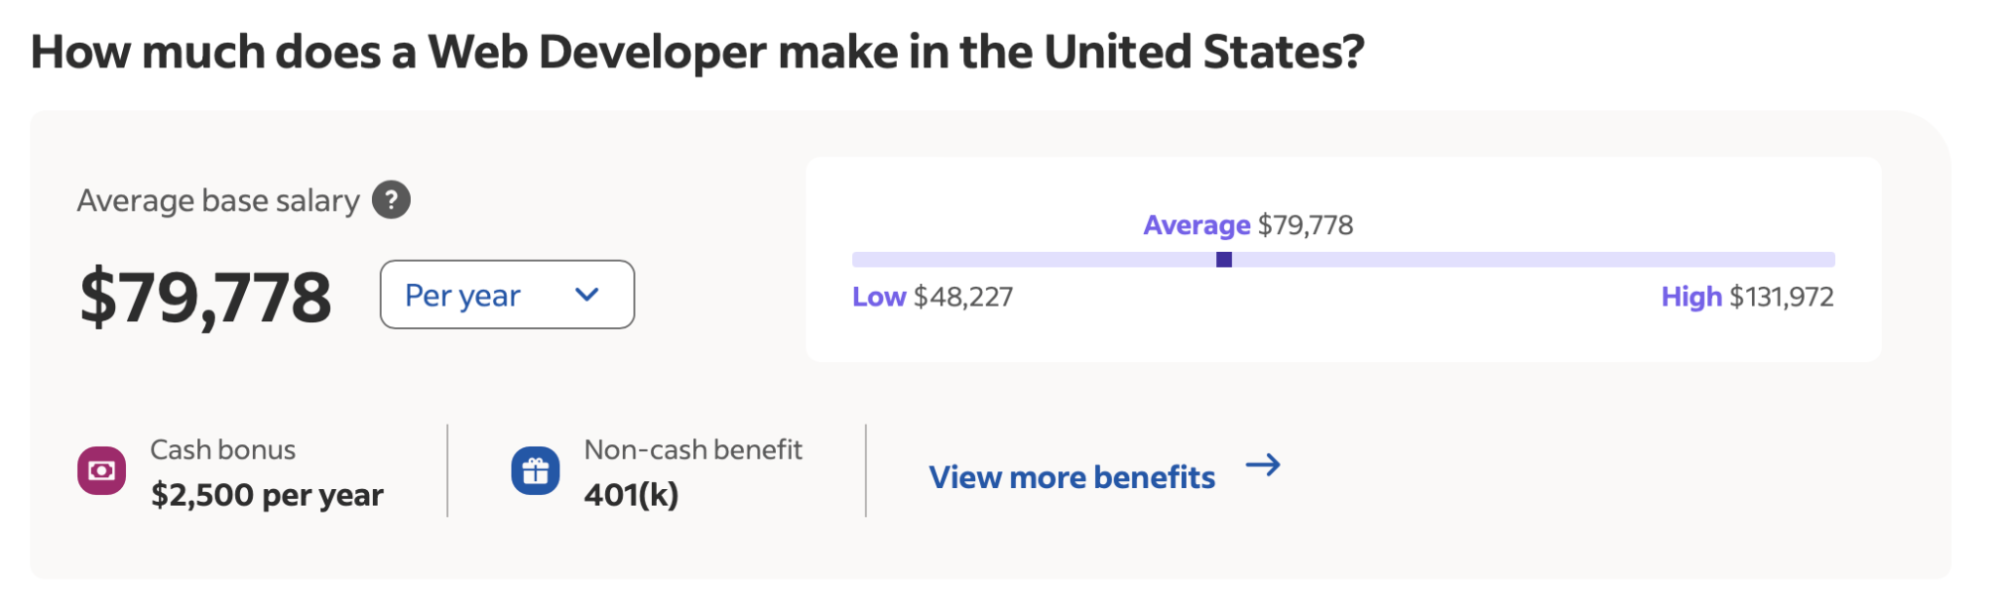 Indeed web developer salary in the U.S.